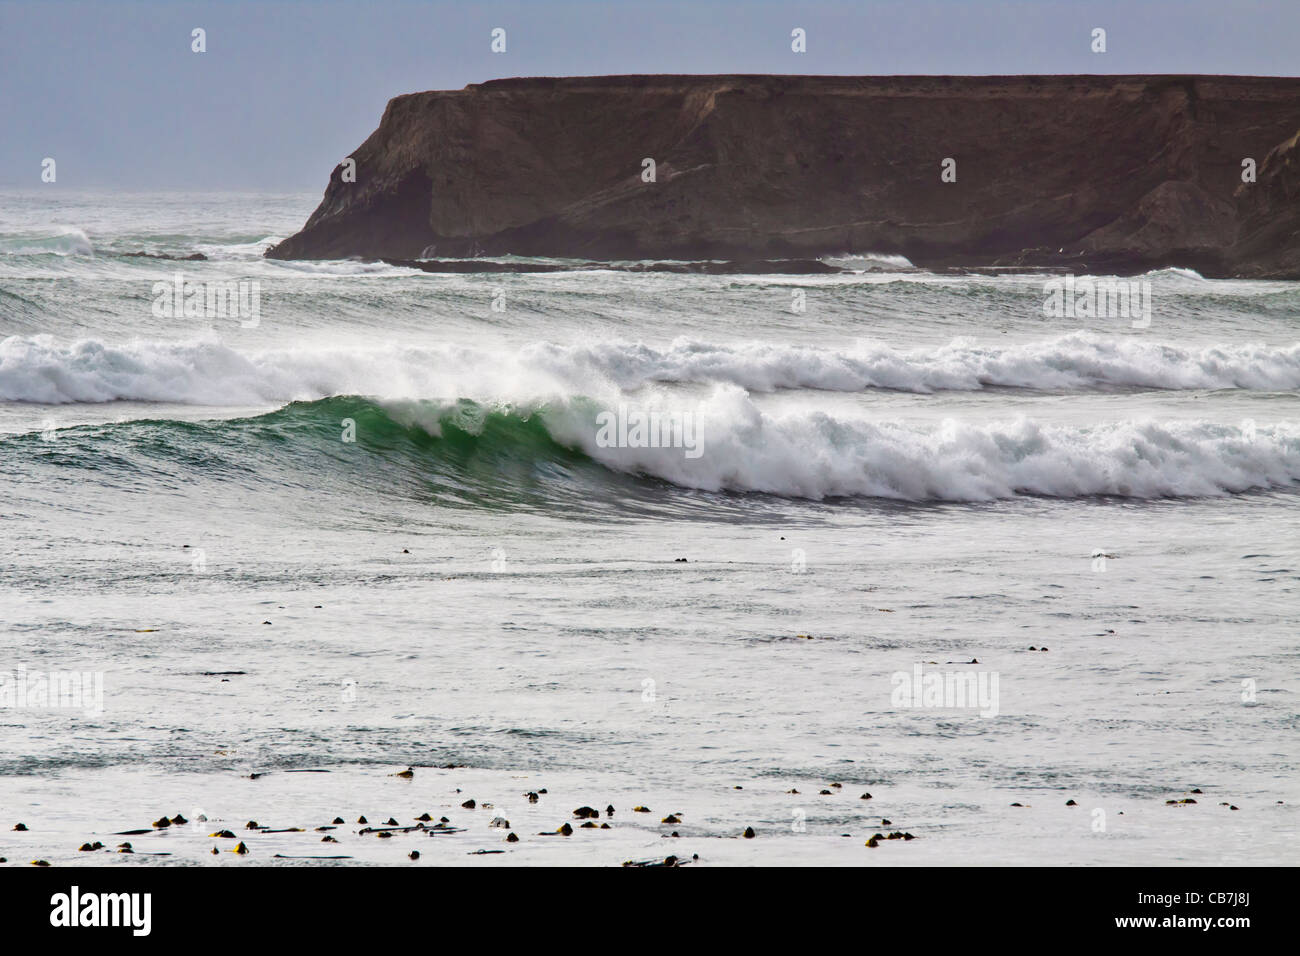 White-capped, crashing waves and high surf on pacific ocean at Point Arena pier inlet on Pacific coast of Northern California. Stock Photo